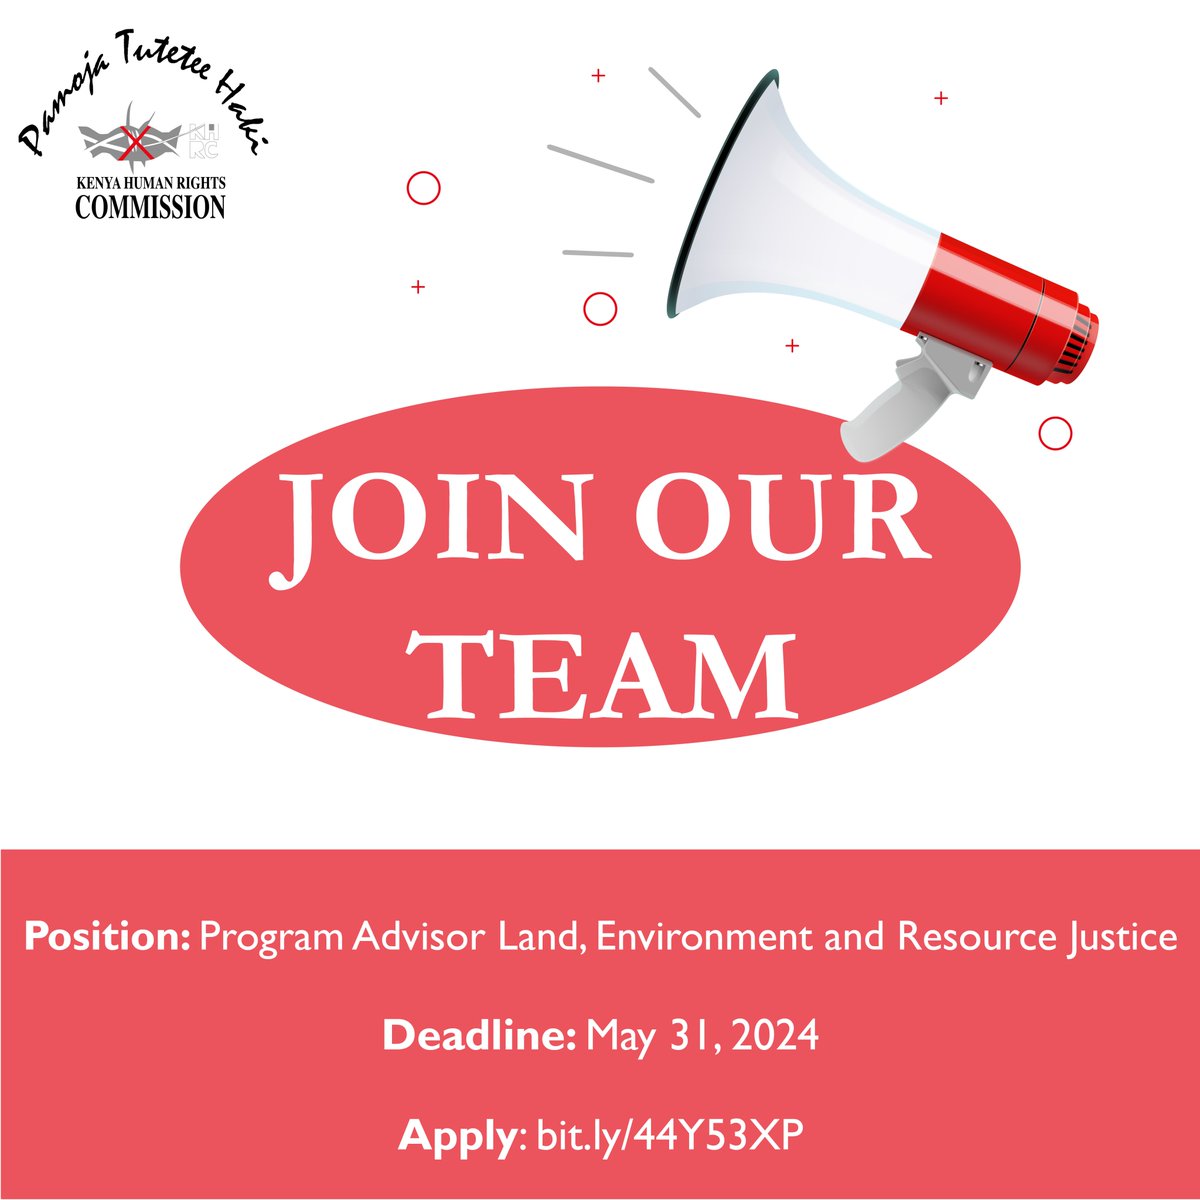 KHRC is recruiting a Program Advisor for land, environment and resource justice. If you are qualified, please apply. Read more about the job here: khrc.or.ke/opportunity/pr… #IkoKazi